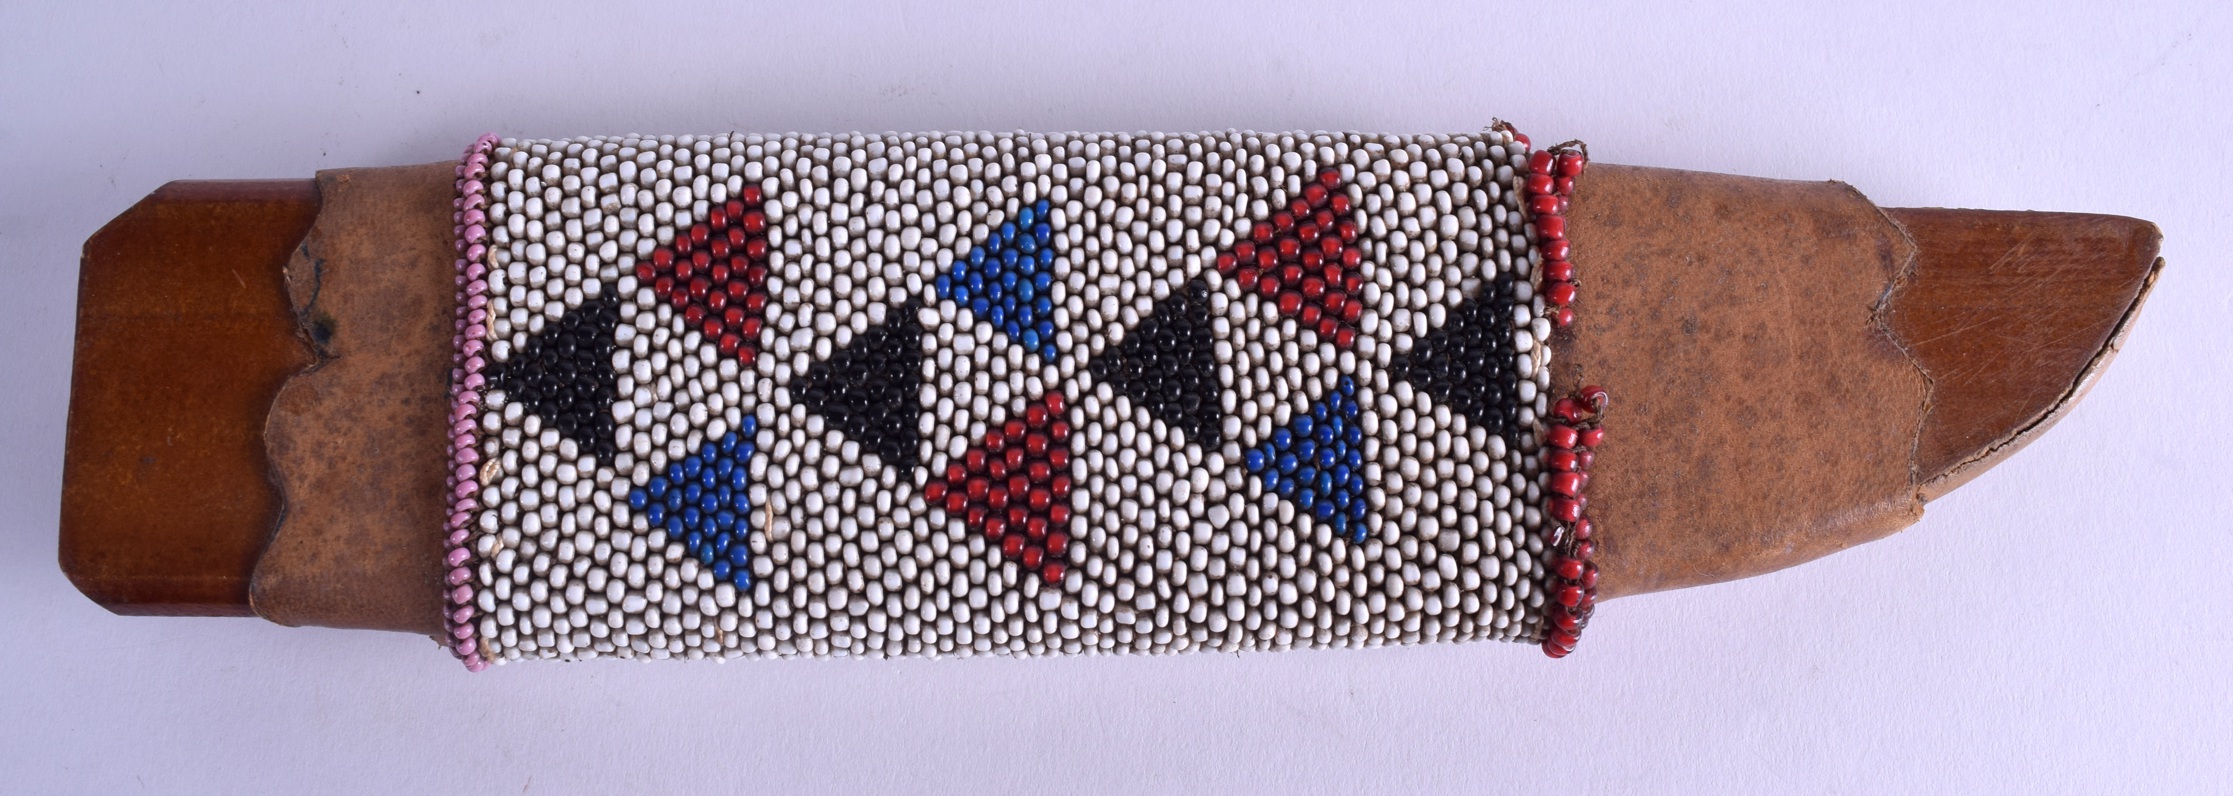 A NATIVE AMERICAN BEAD WORK KNIFE SCABBARD decorated with coloured triangular motifs. 28 cm long.